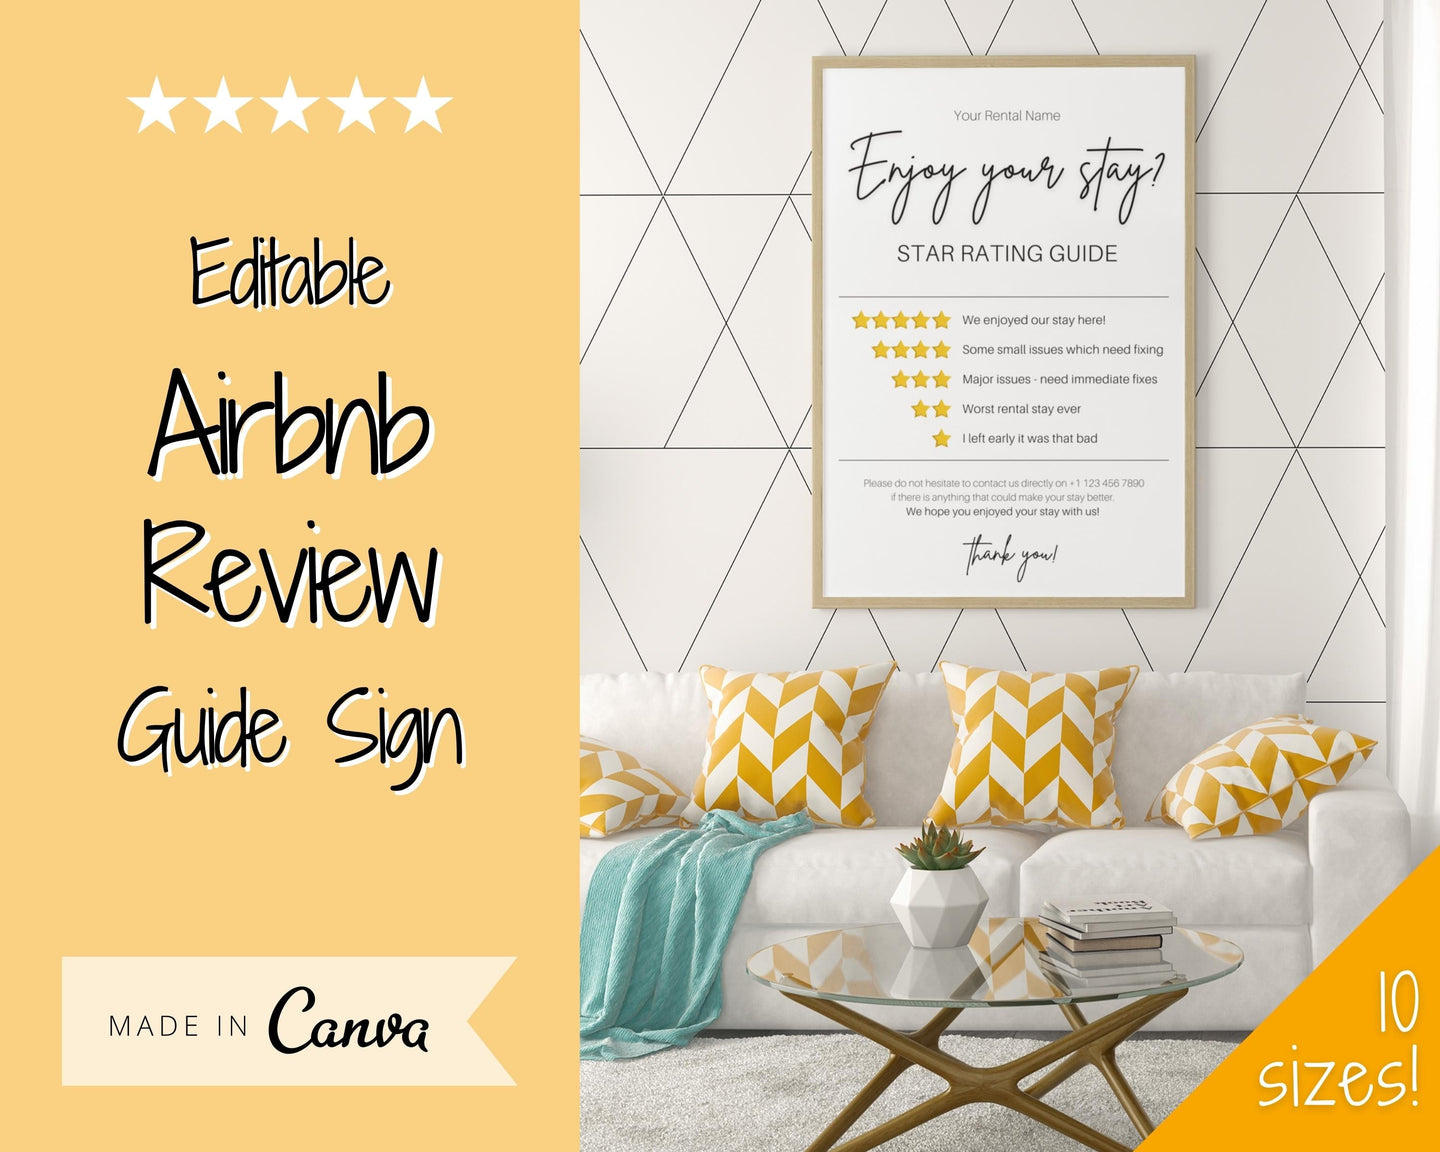 Airbnb RATING Sign, Airbnb Template, 5* Review Airbnb Signage, Check Out, Super Host, Welcome Book, House Rules Checklist, Air bnb, VRBO STR | Yellow